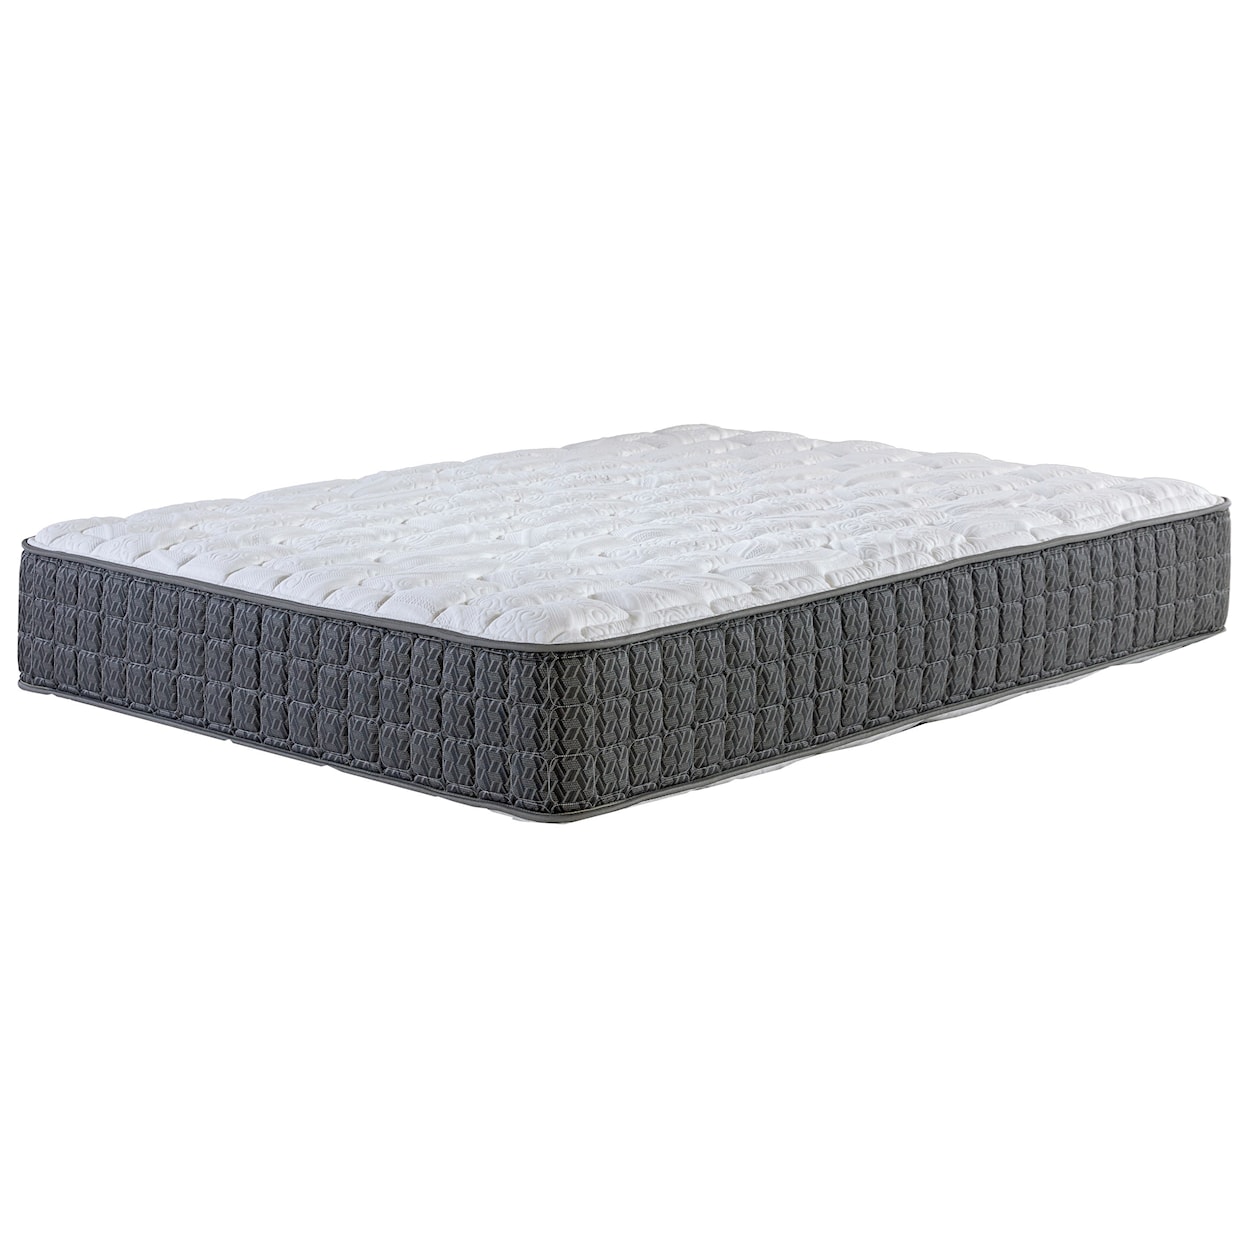 Corsicana Rossington Firm Twin Firm Two Sided Mattress